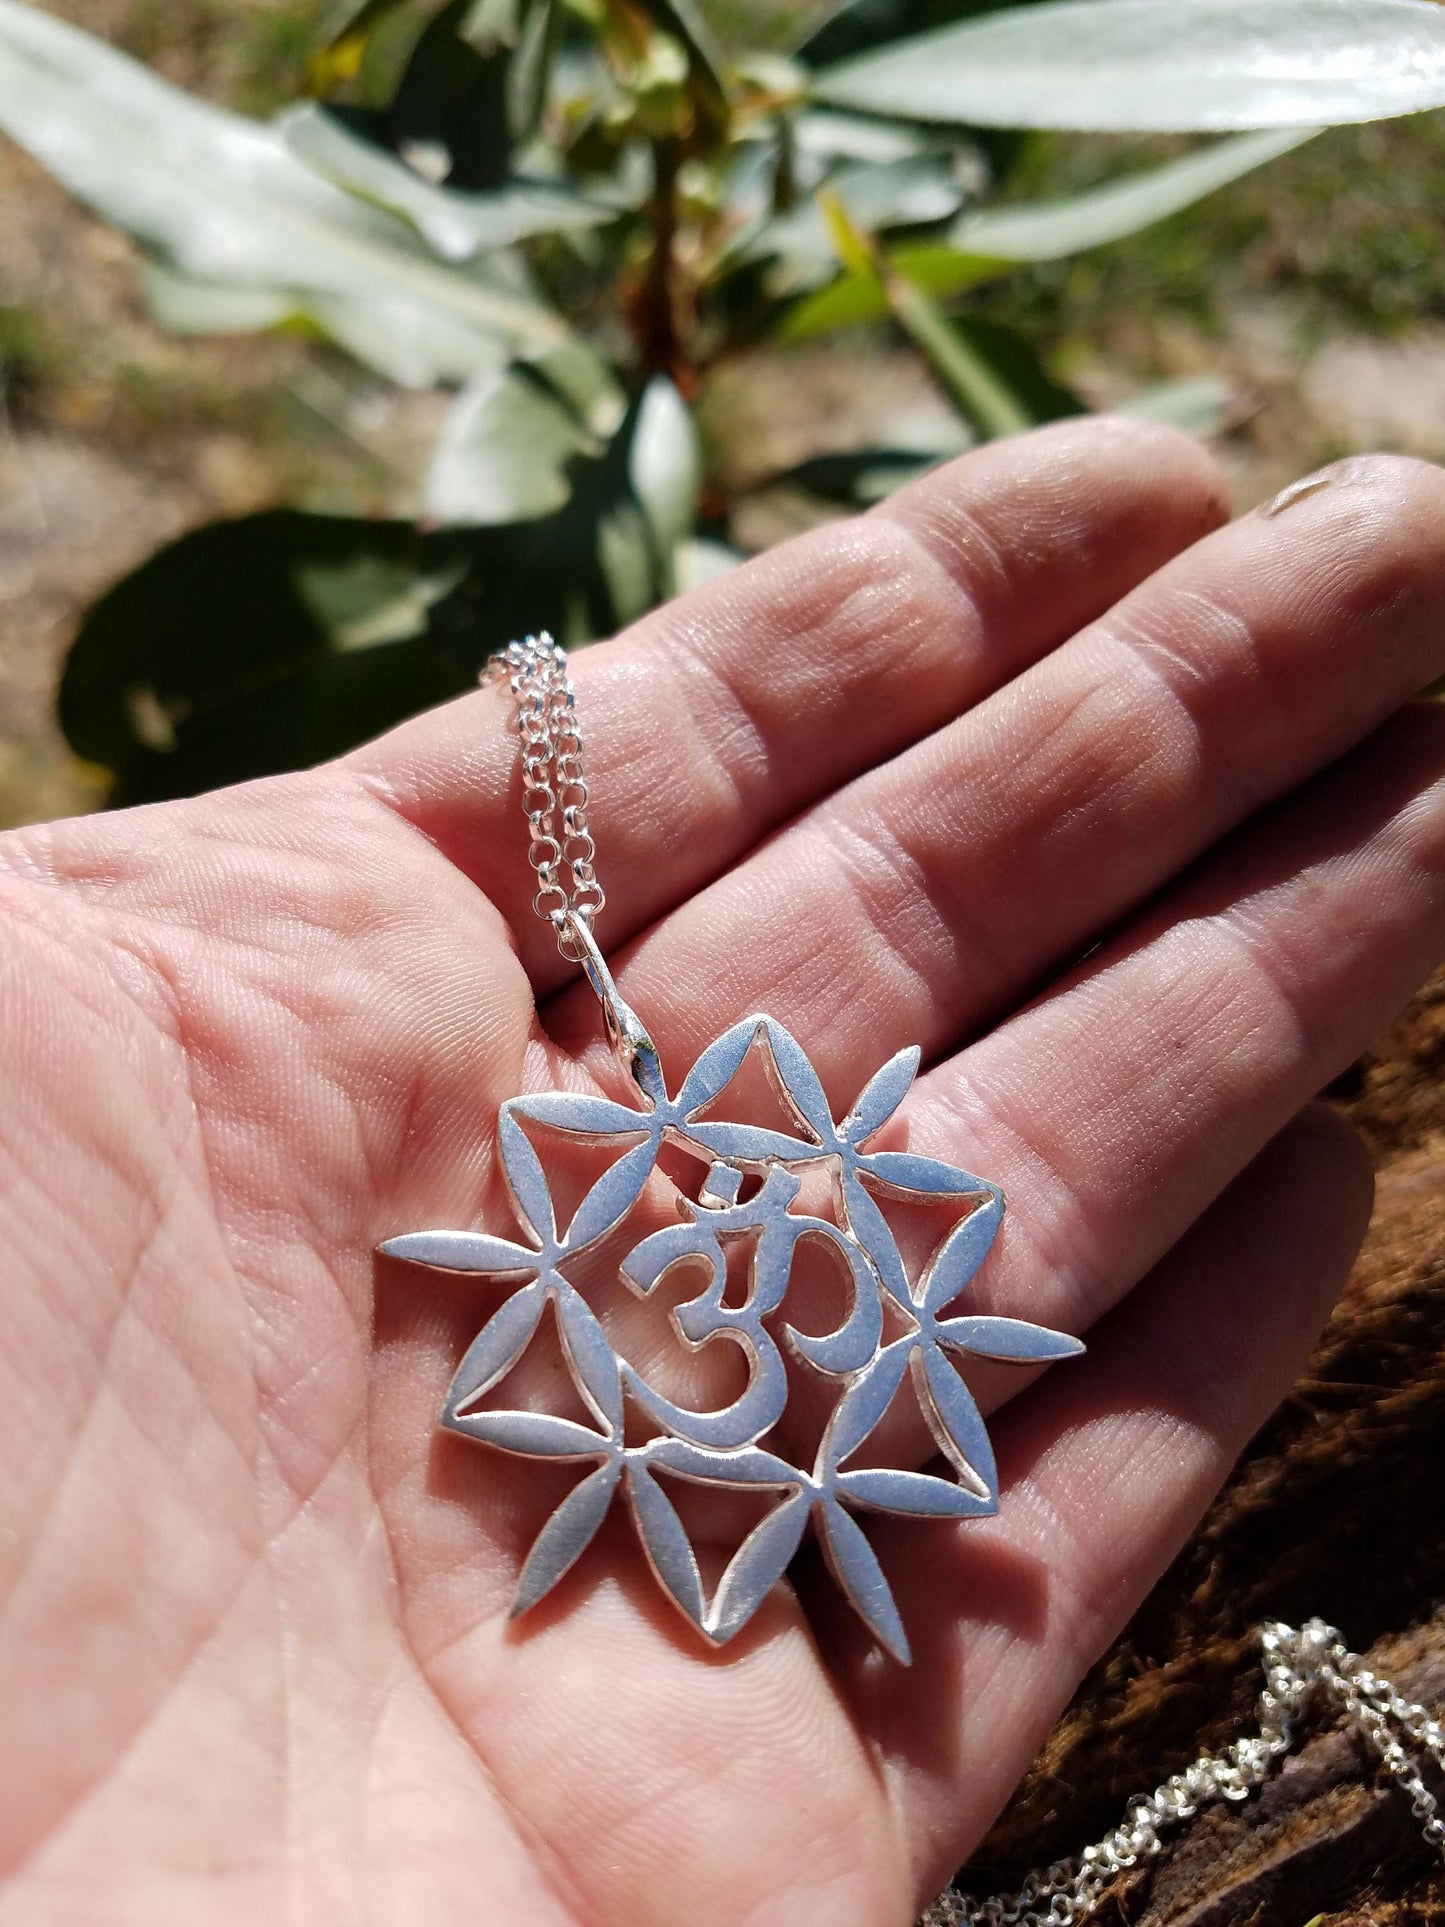 Om and Flower of Life Pendant in Recycled Sterling Silver - Sacred Geometry